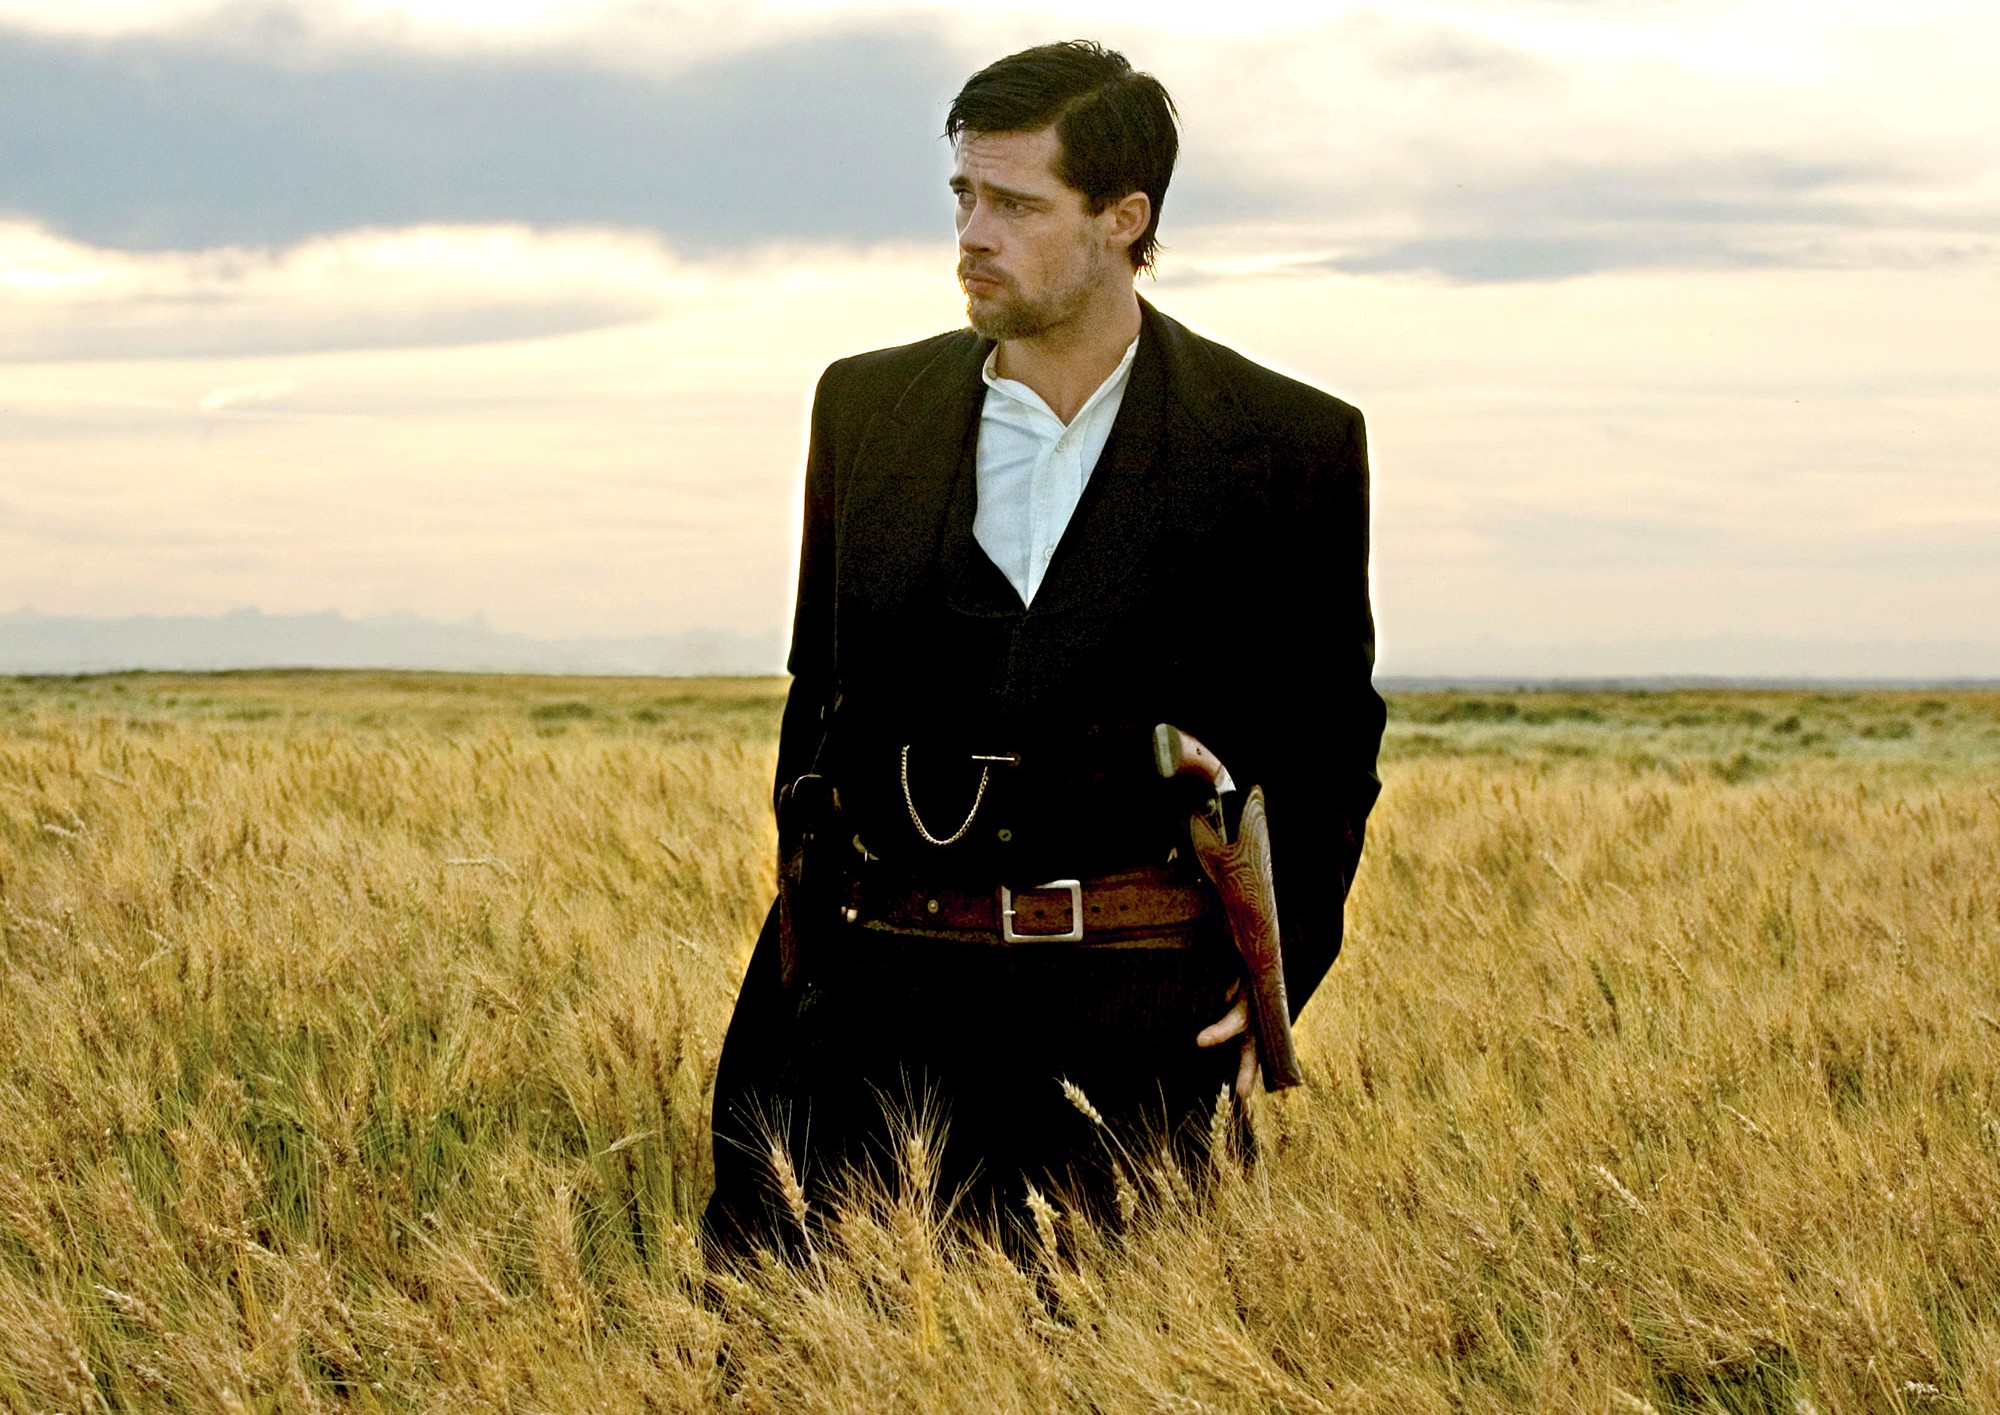 Image from the motion picture The Assassination of Jesse James by the Coward Robert Ford